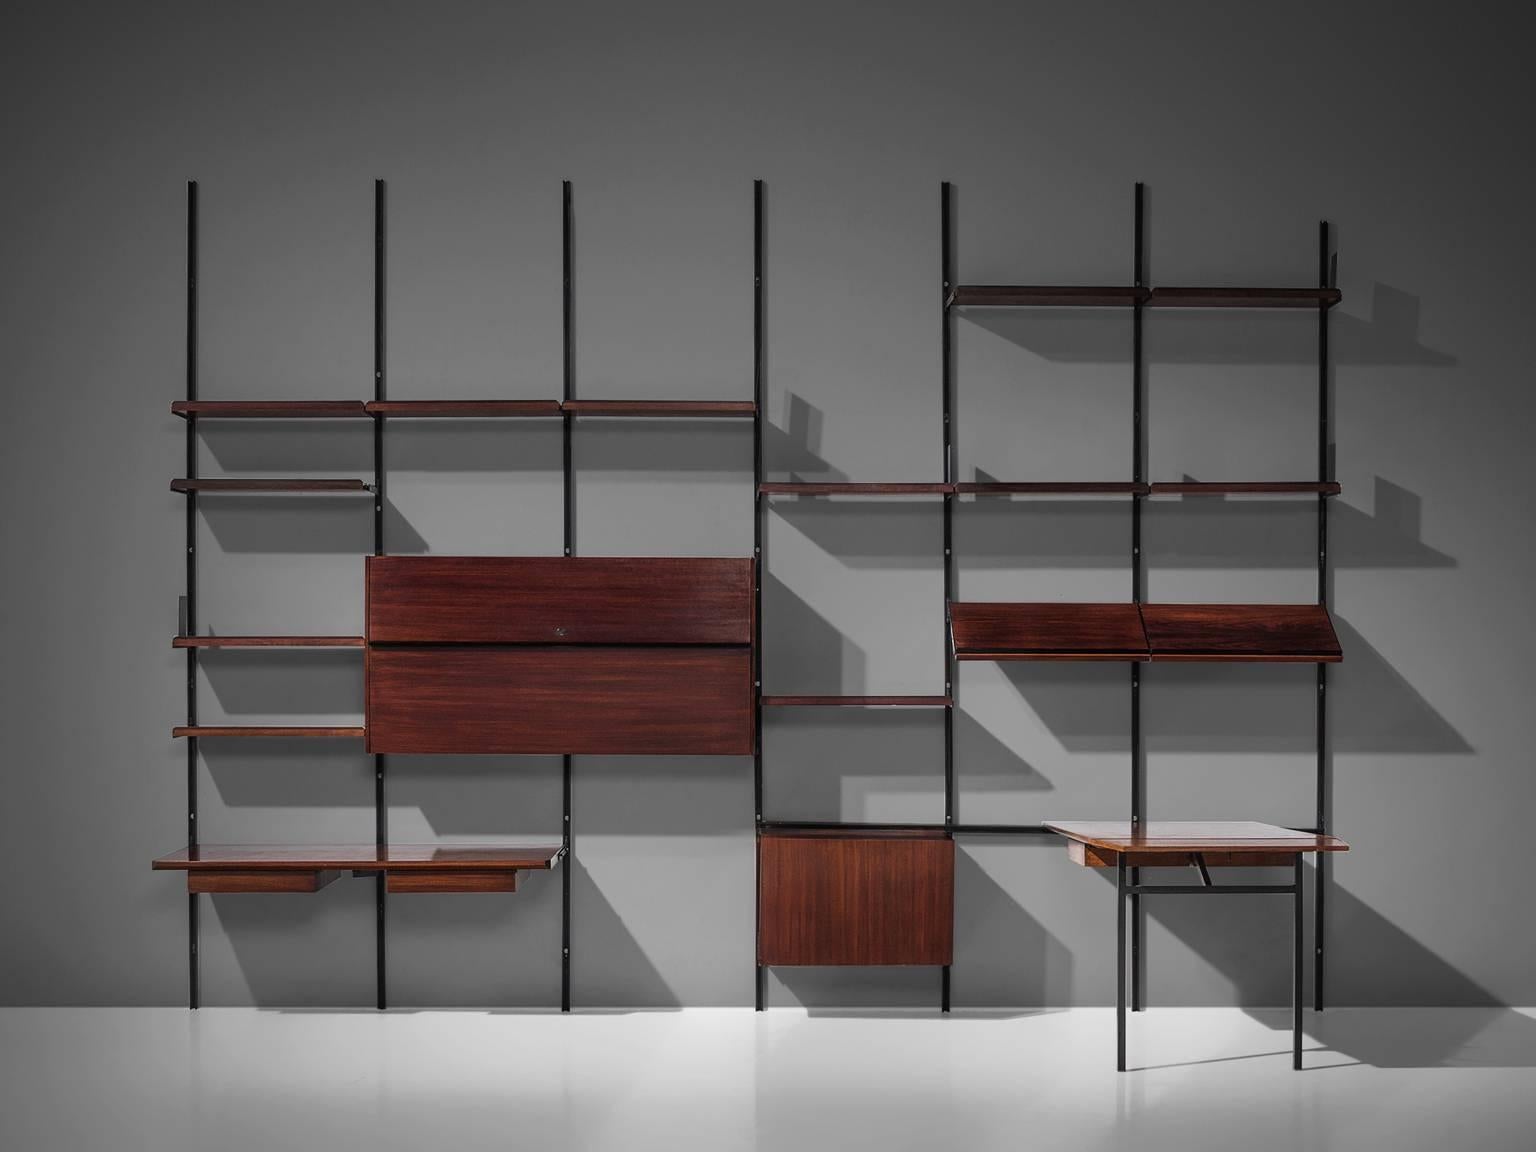 Osvaldo Borsani for Tecno, bookcase or wall unit E22, in metal and rosewood, Italy, 1950s.

This wall-mounted shelving unit is six sections large. This system was developed by Borsani as coordinated system for furnishing either the home or the